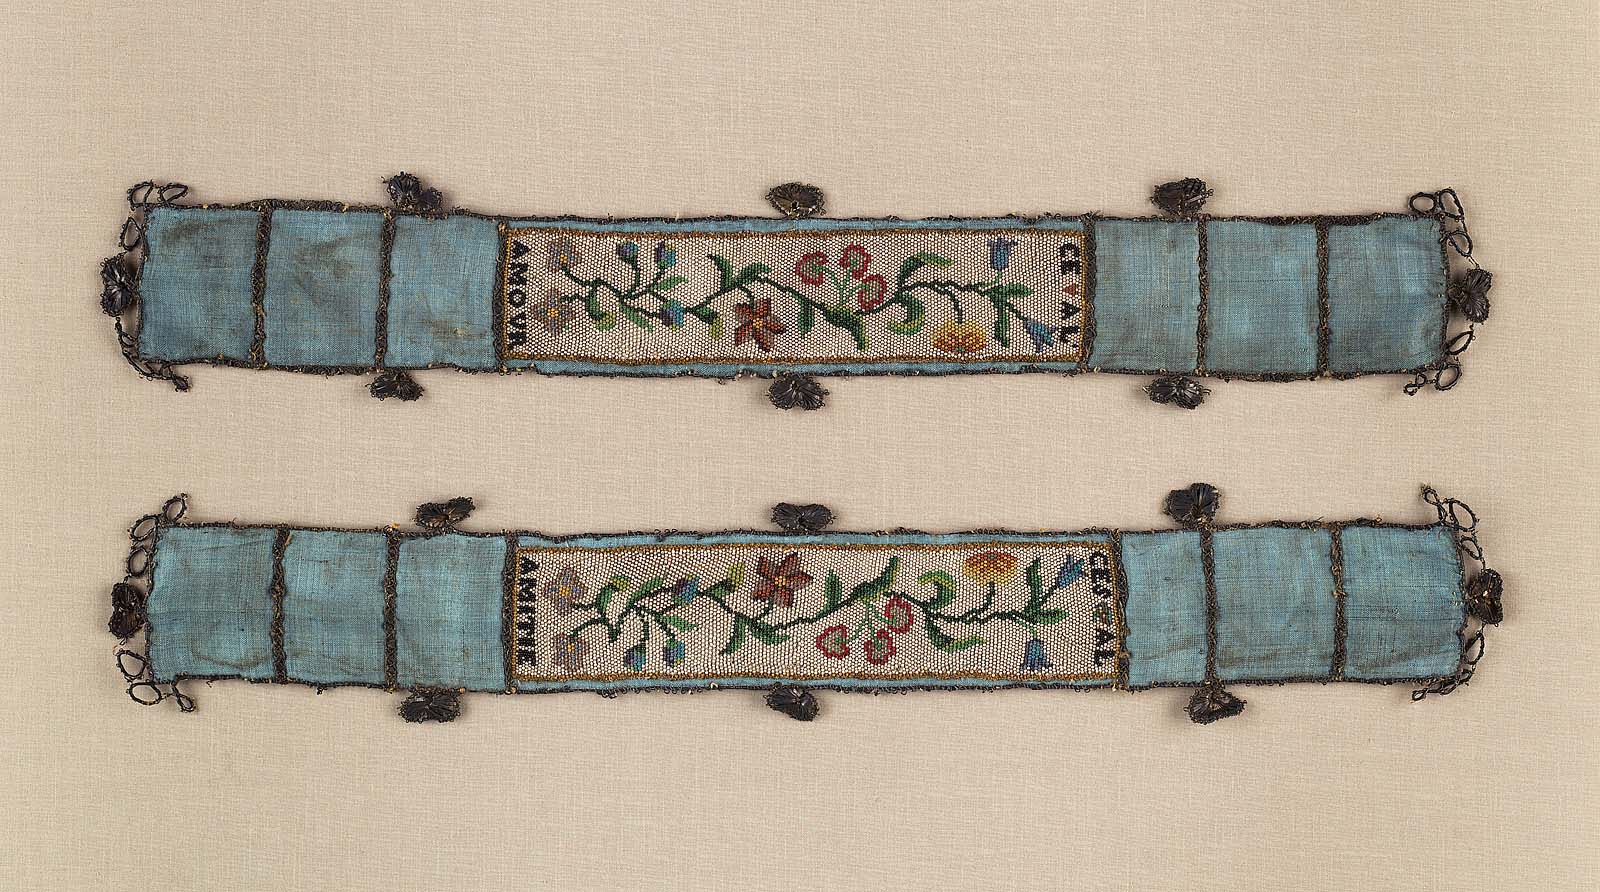 French Garter (one of a pair), 18th century, Museum of Fine Arts Boston